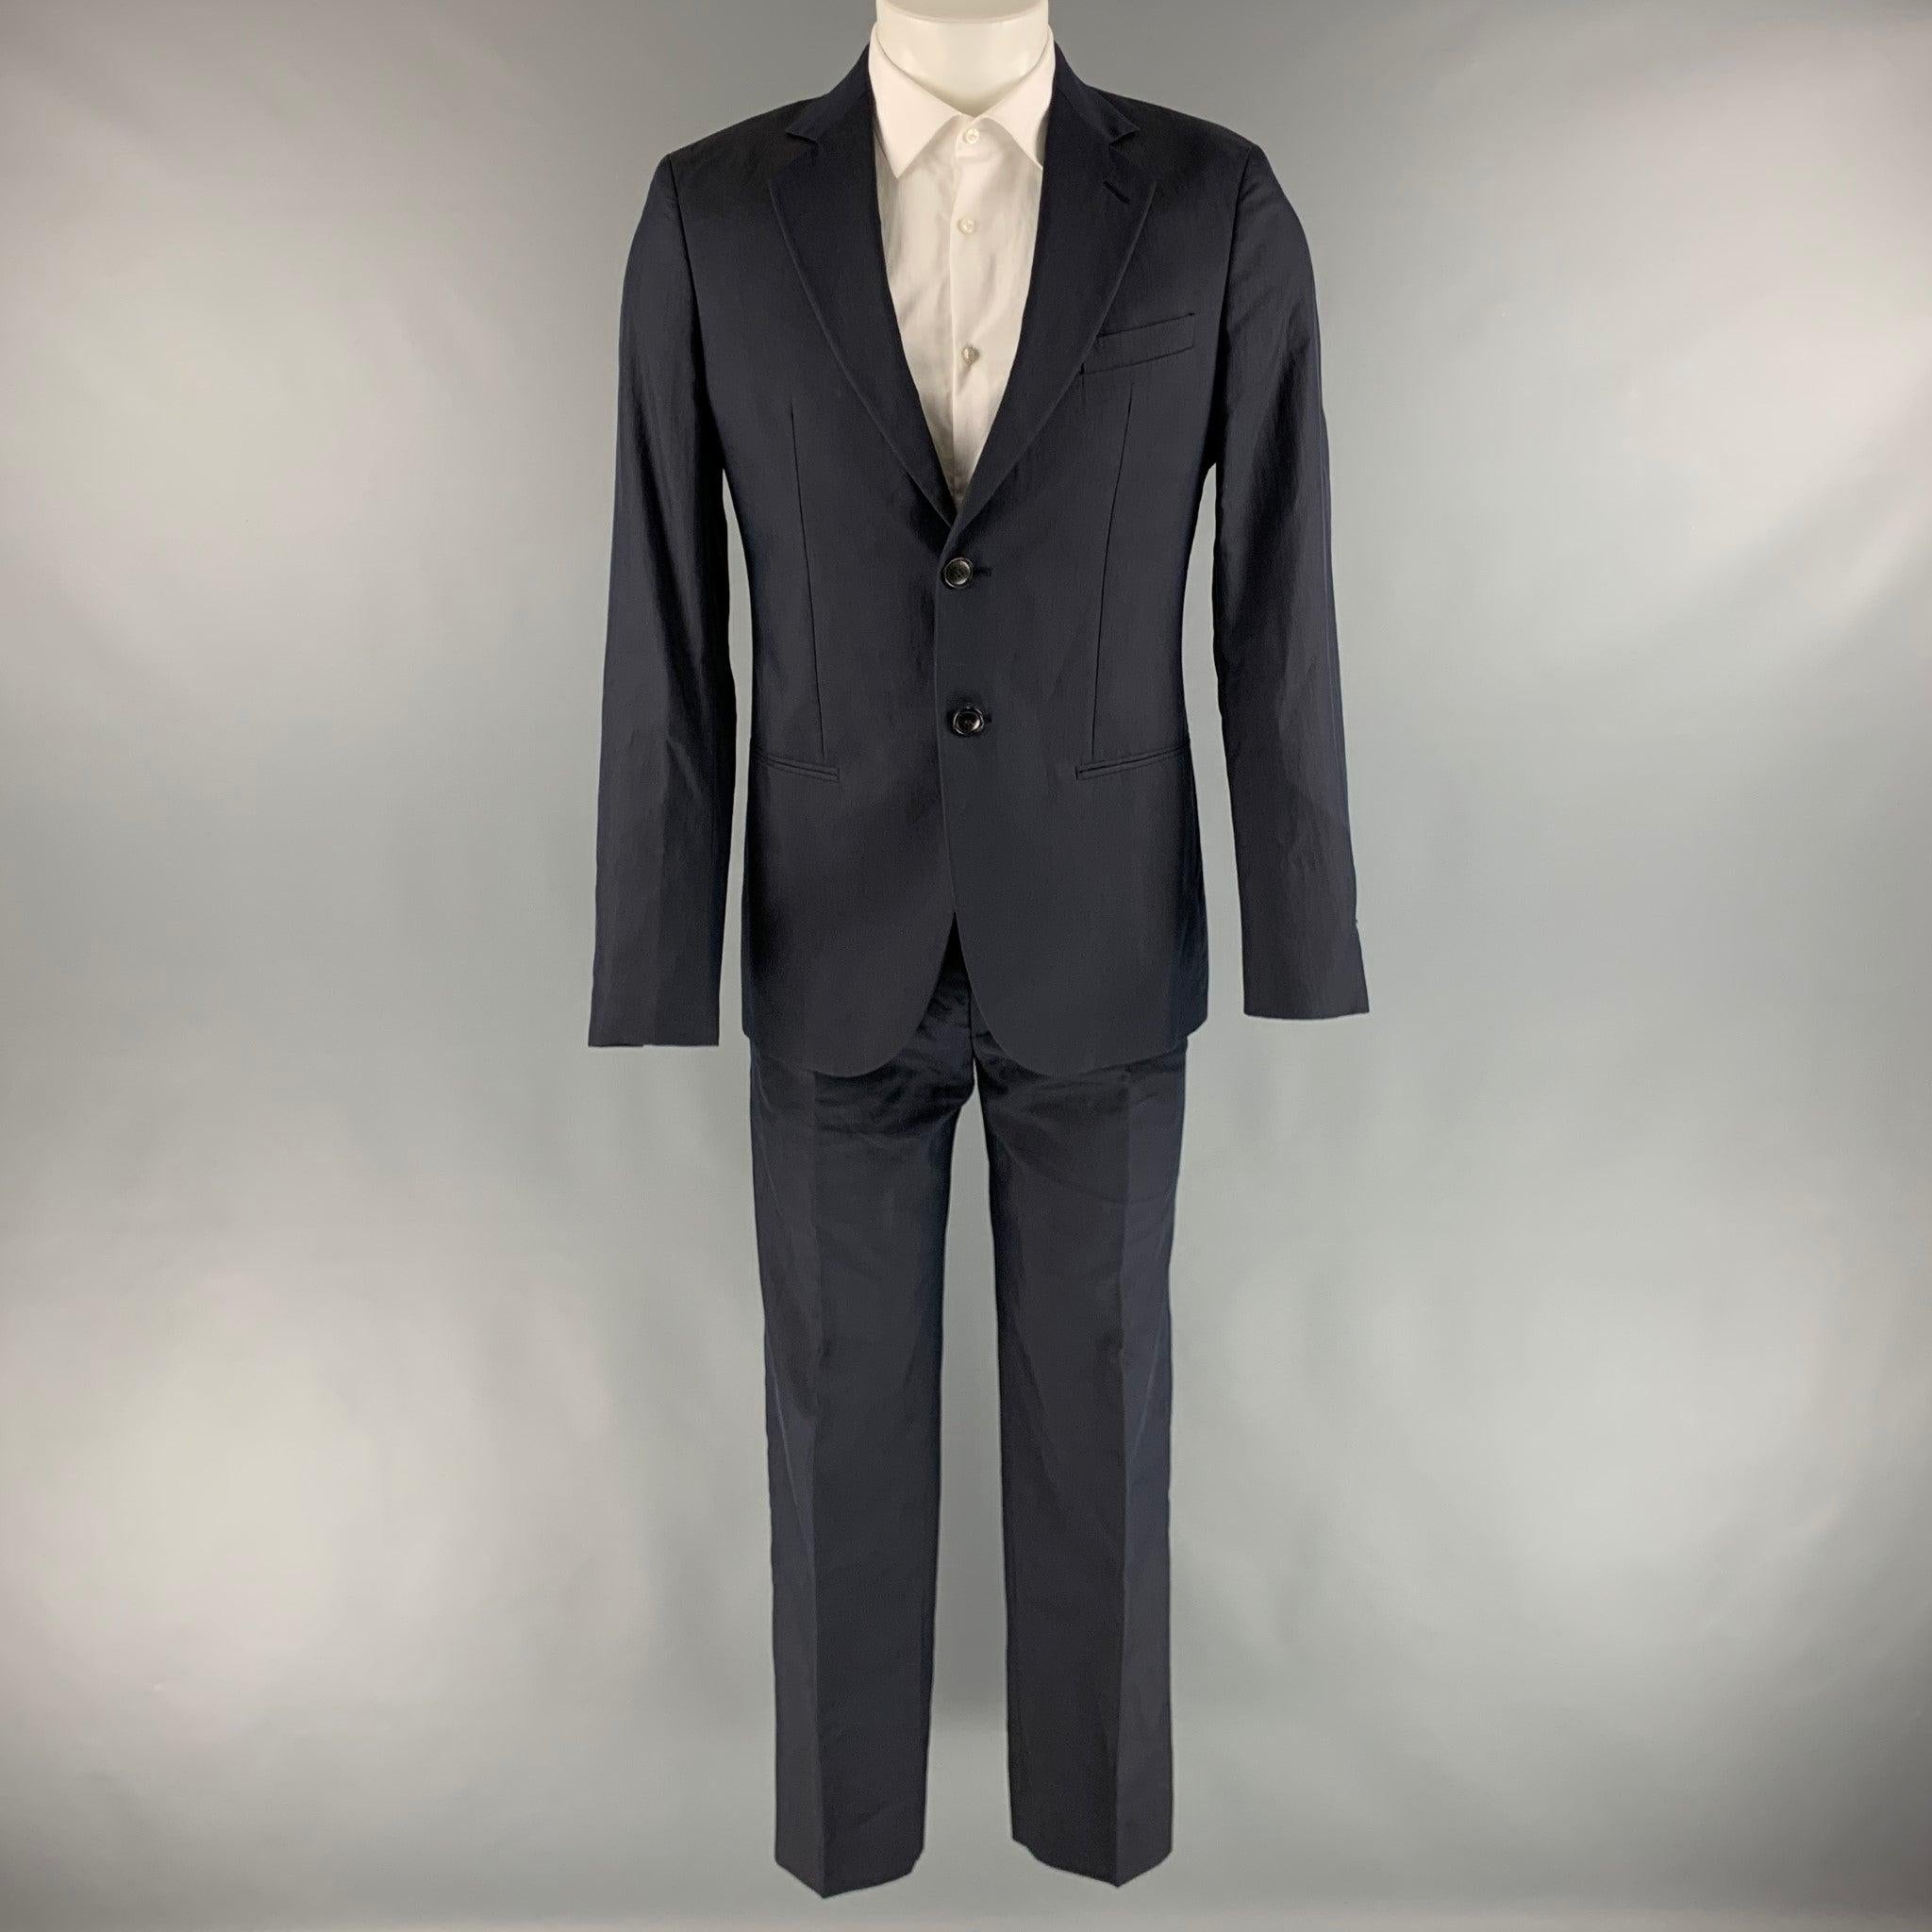 GIORGIO ARMANI Suit comes in a navy cotton silk woven material with a half liner and includes a single breasted, two button sport coat with a notch lapel and a matching flat front trousers. Made in Italy.Very Good Pre-Owned Condition.  

Marked:  